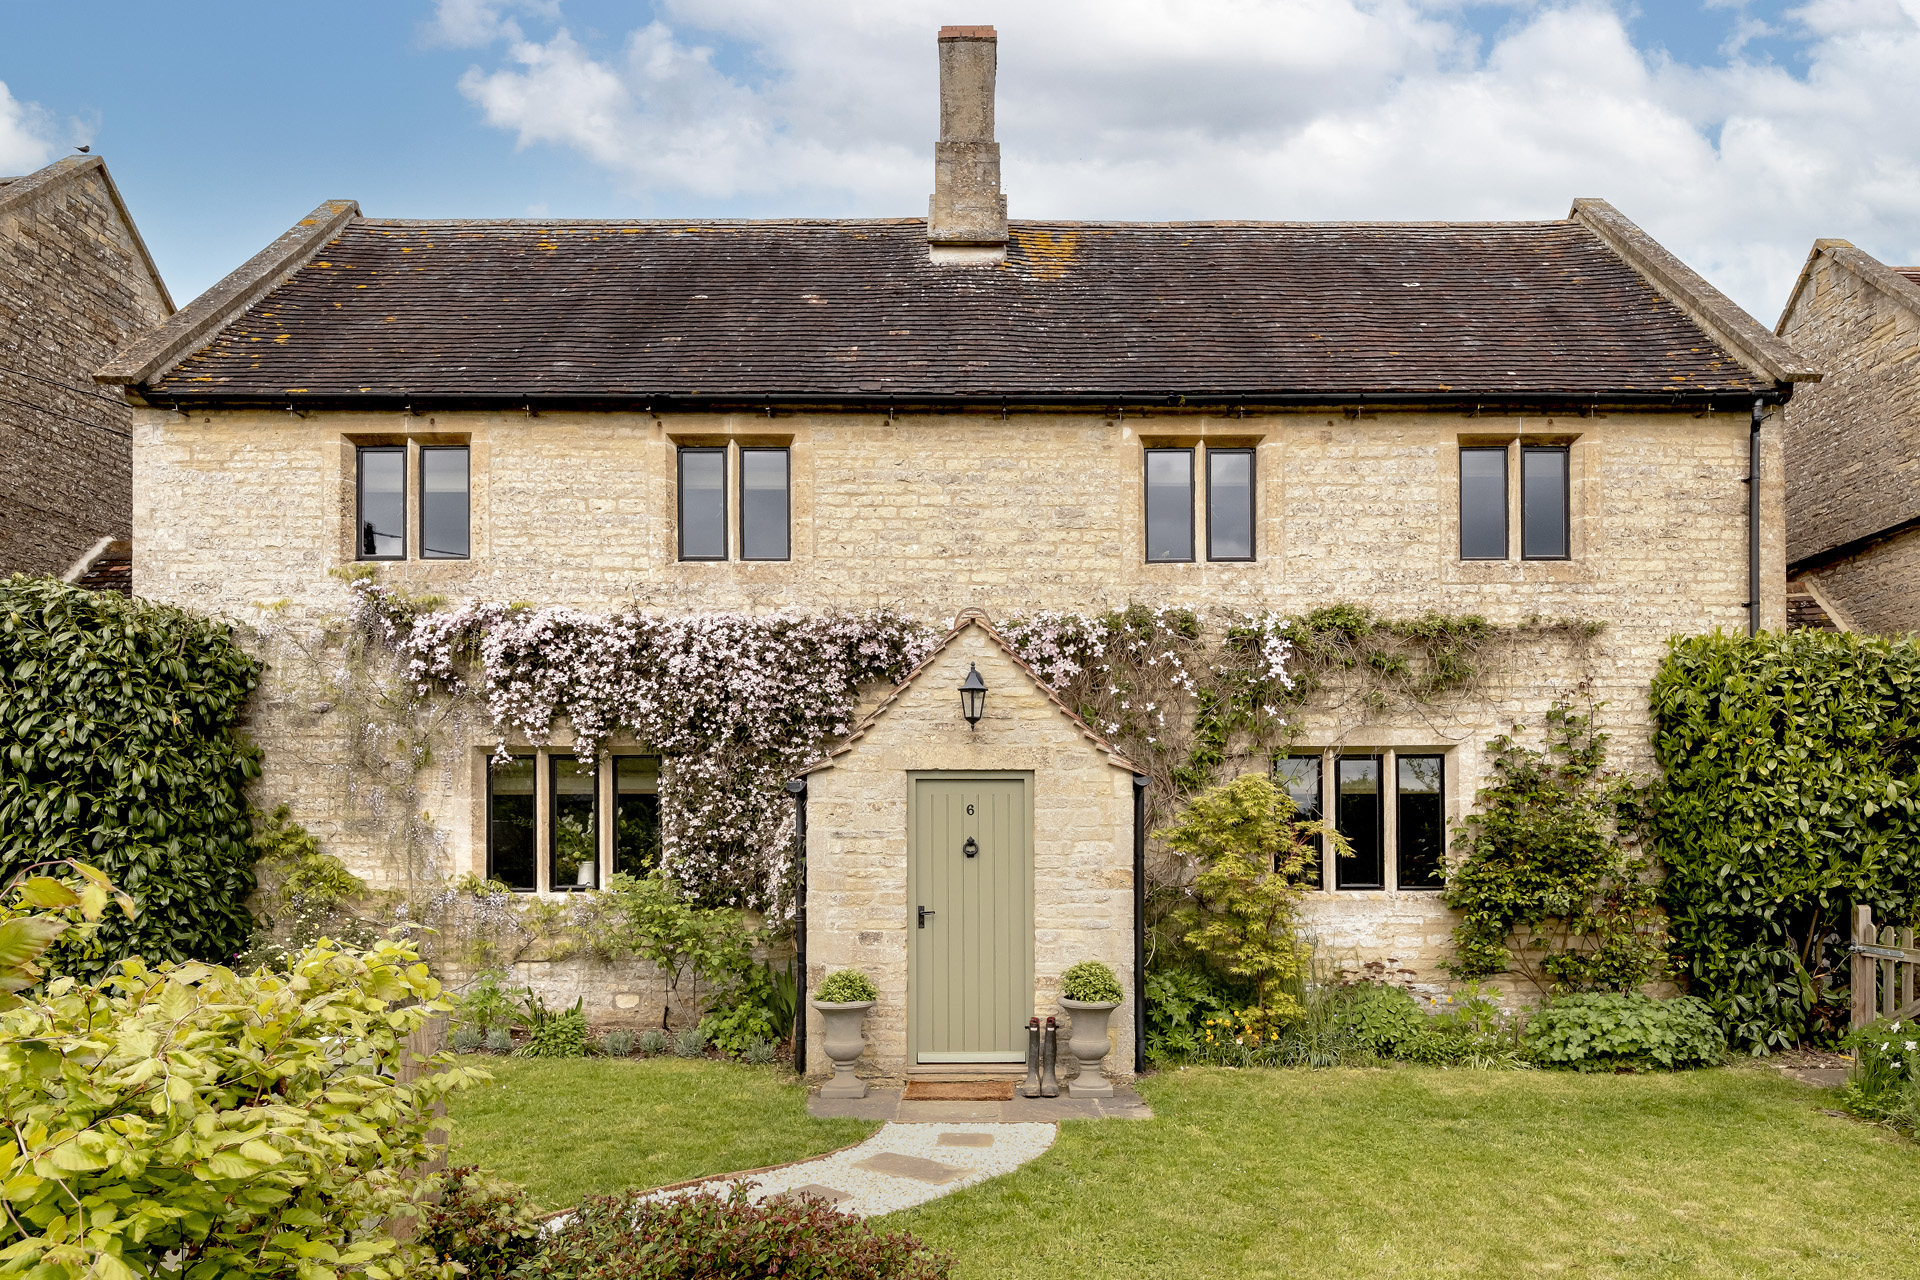 A large home in the Cotswolds